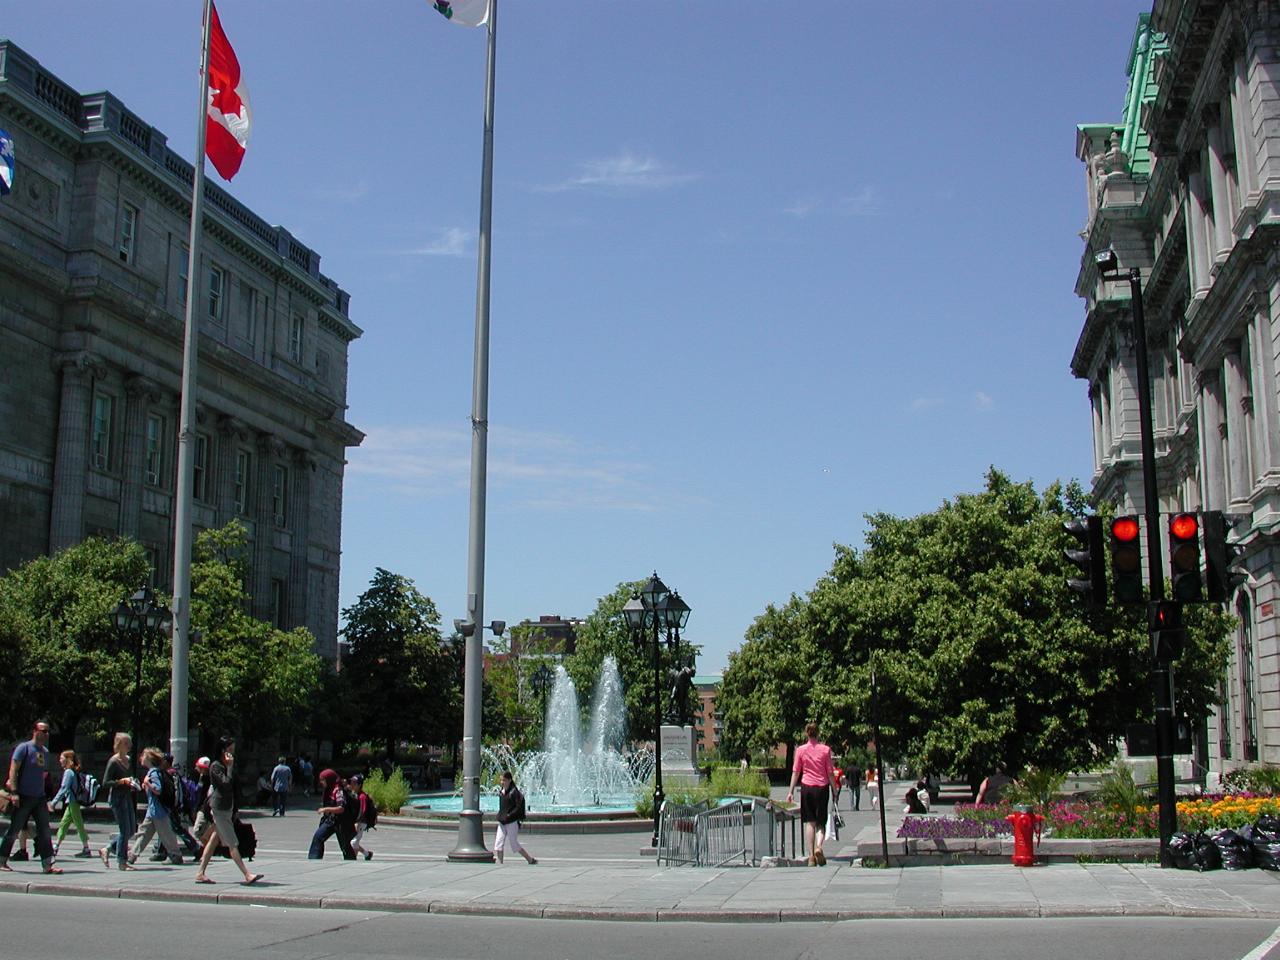 Place Vauquelin, adjacent to Town Hall, and opposite previous photo